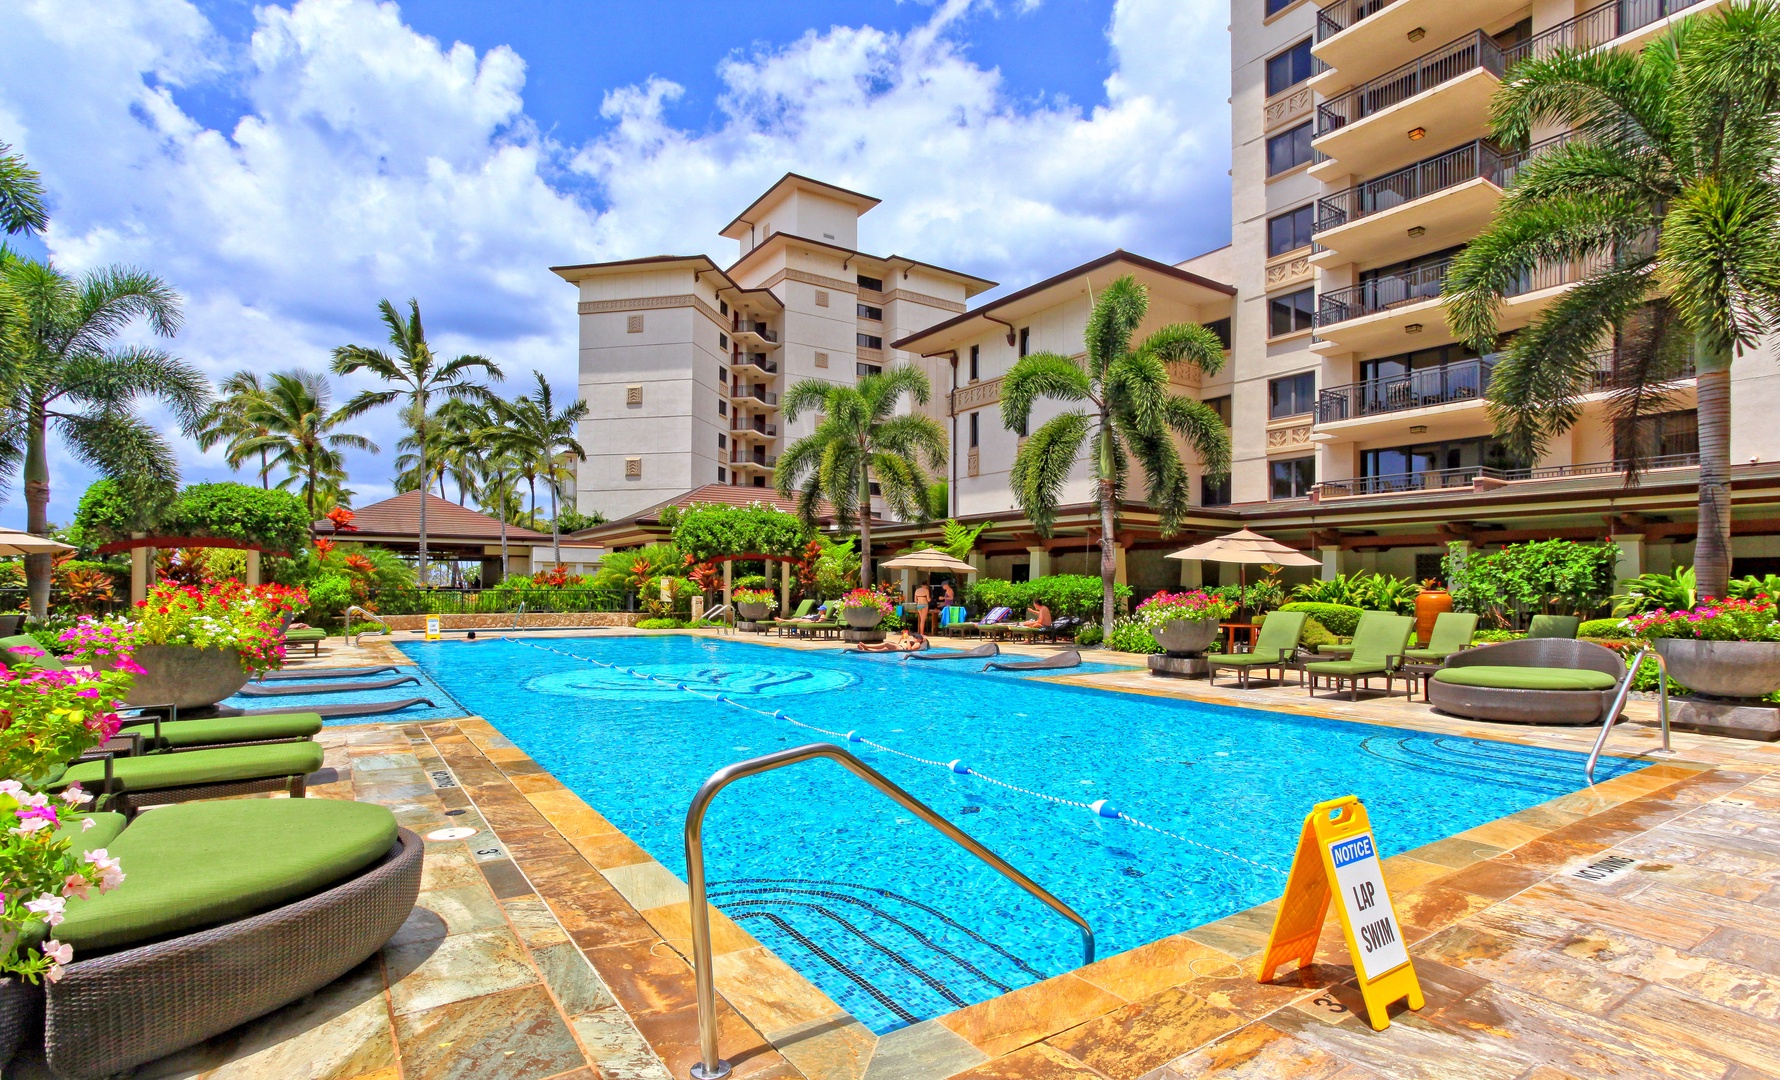 Kapolei Vacation Rentals, Ko Olina Beach Villas B706 - A refreshing day at the lap pool then off to sunset beaches.